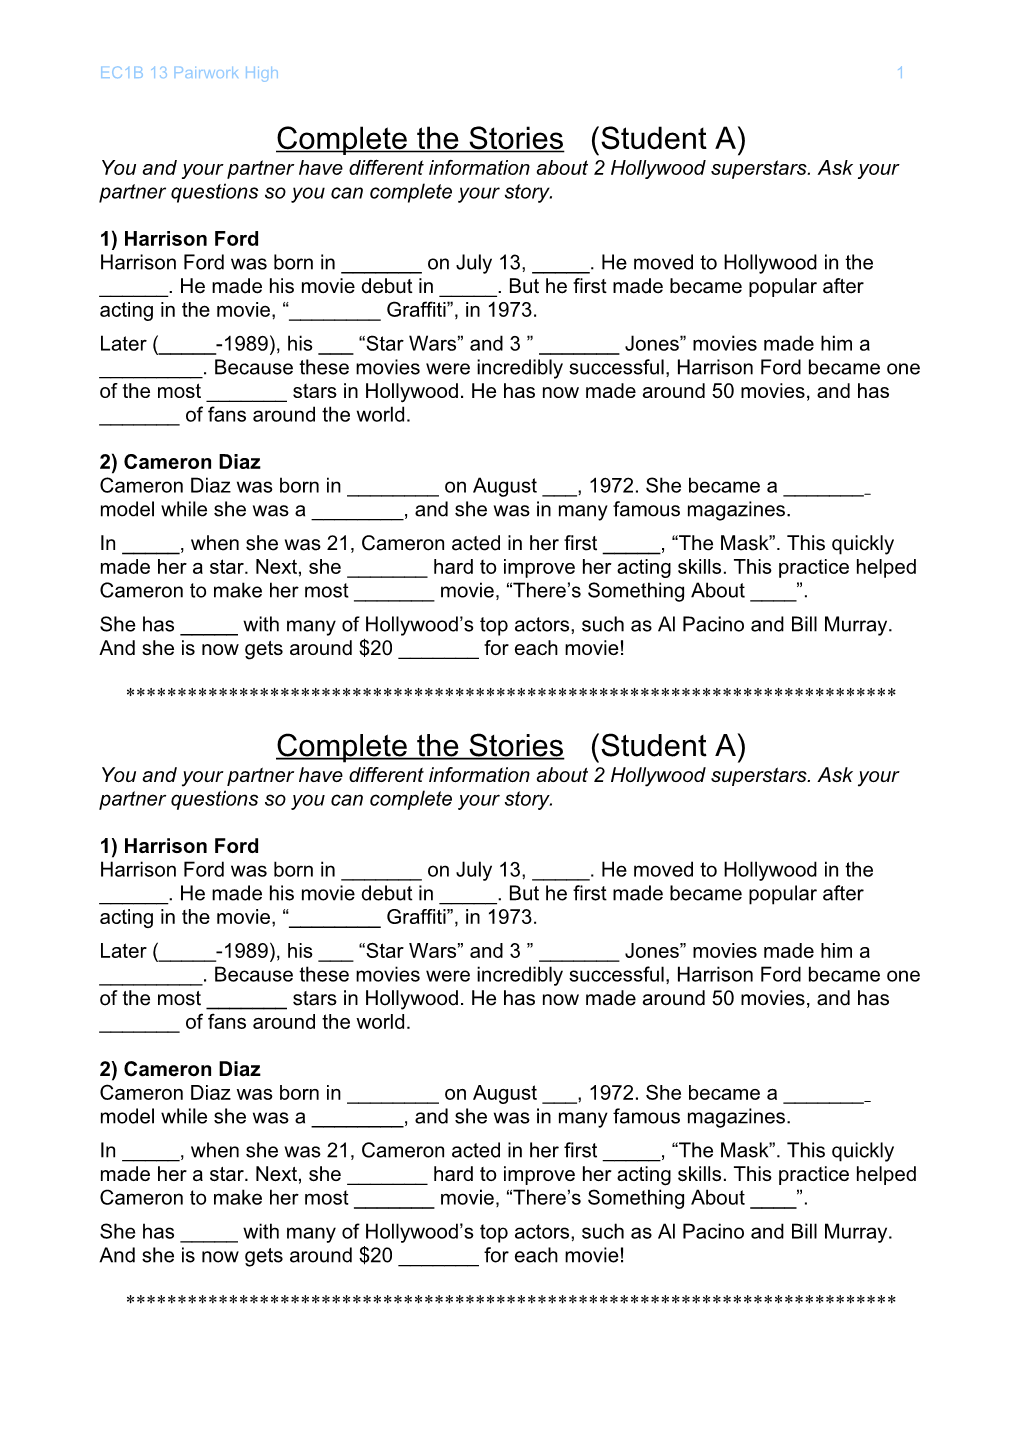 Complete the Stories (Student A)